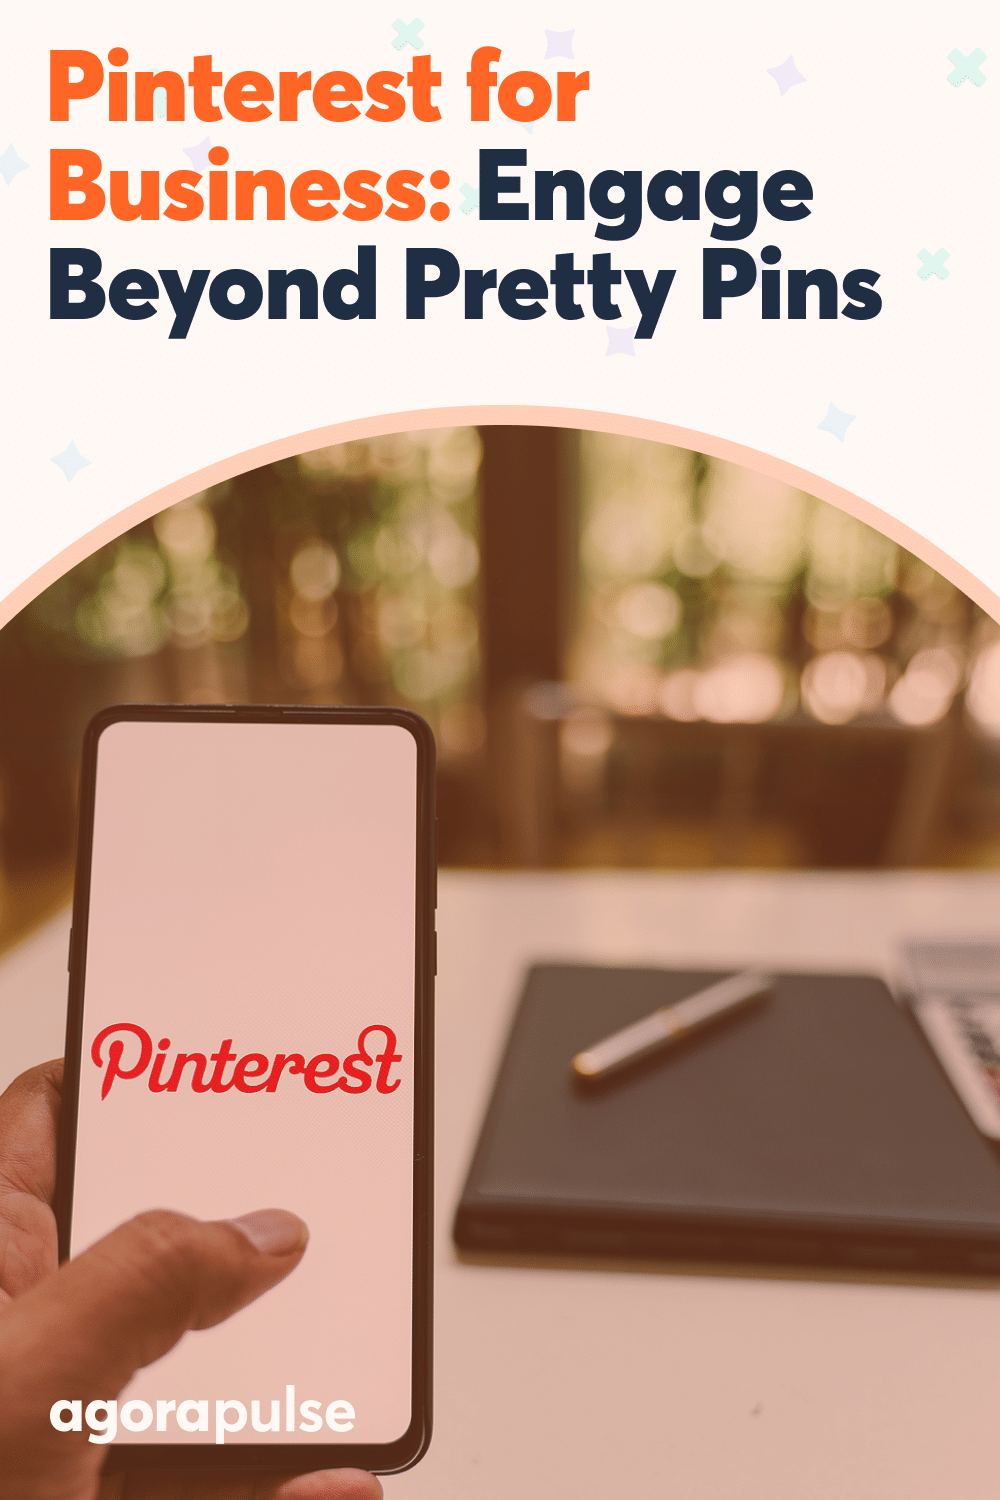 Pinterest for Business: How to Go Beyond Pretty Pins and Engage More Customers